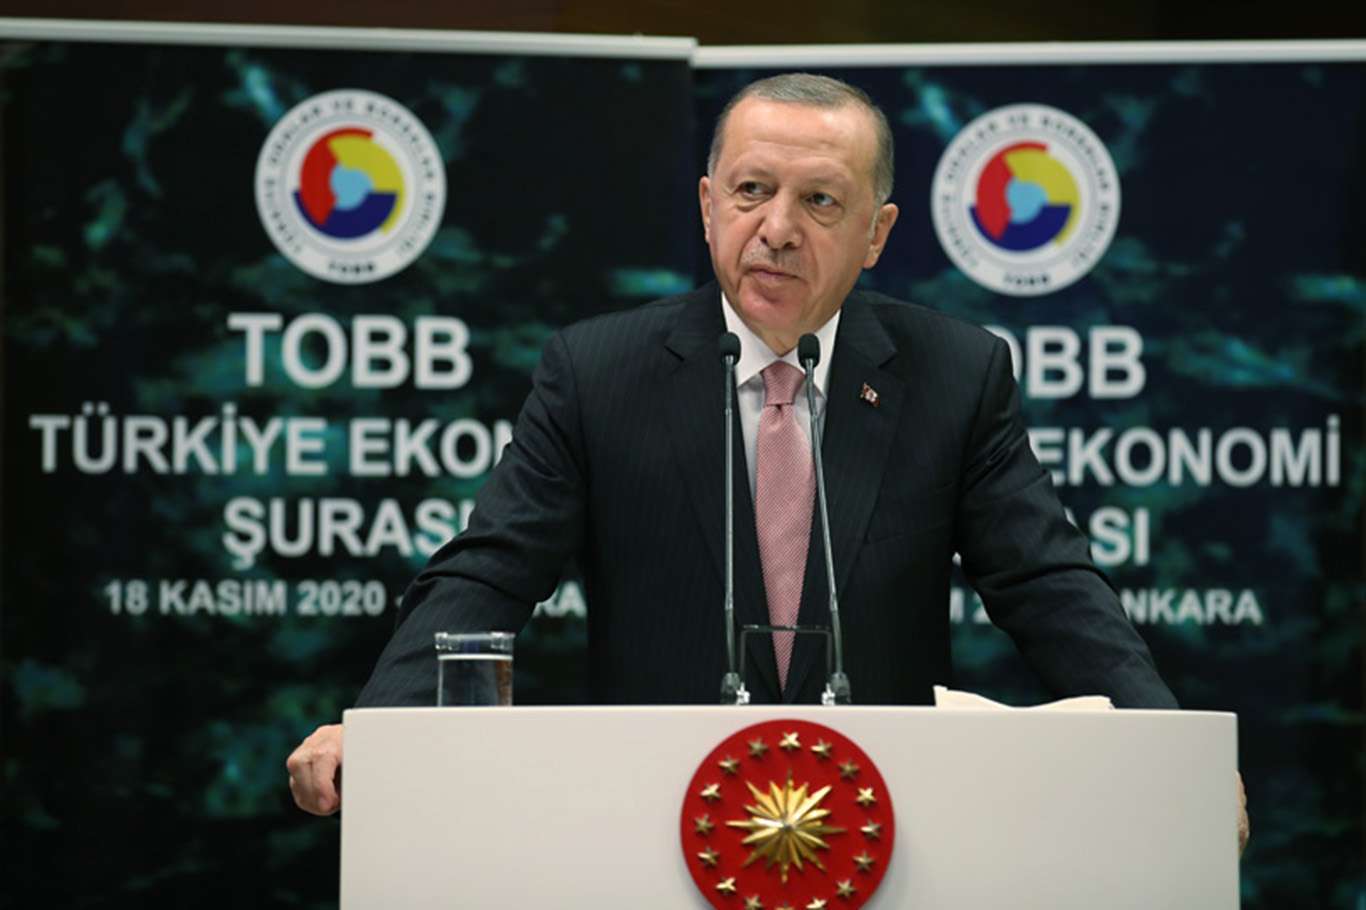 Erdoğan: Turkey is one of the rising centers of investment, production and trade